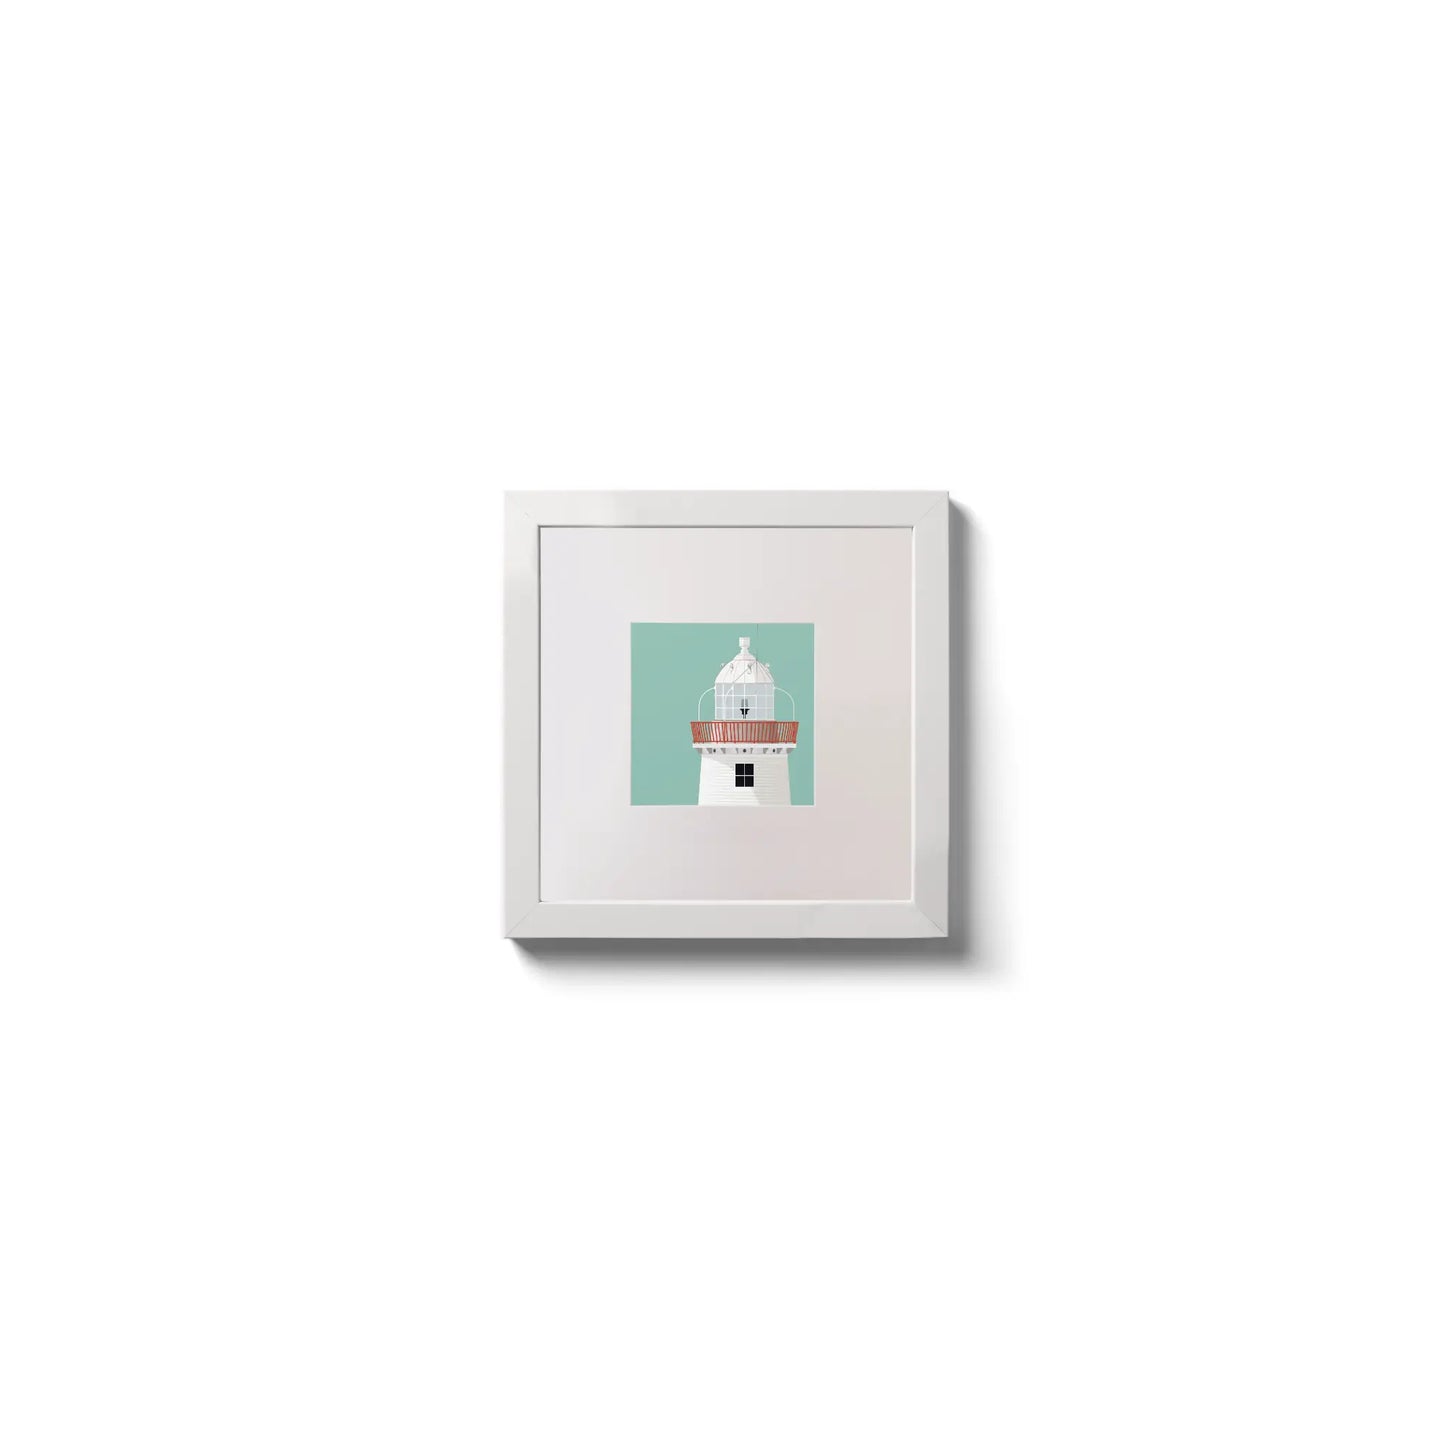 Illustration of Inishgort lighthouse on an ocean green background,  in a white square frame measuring 10x10cm.